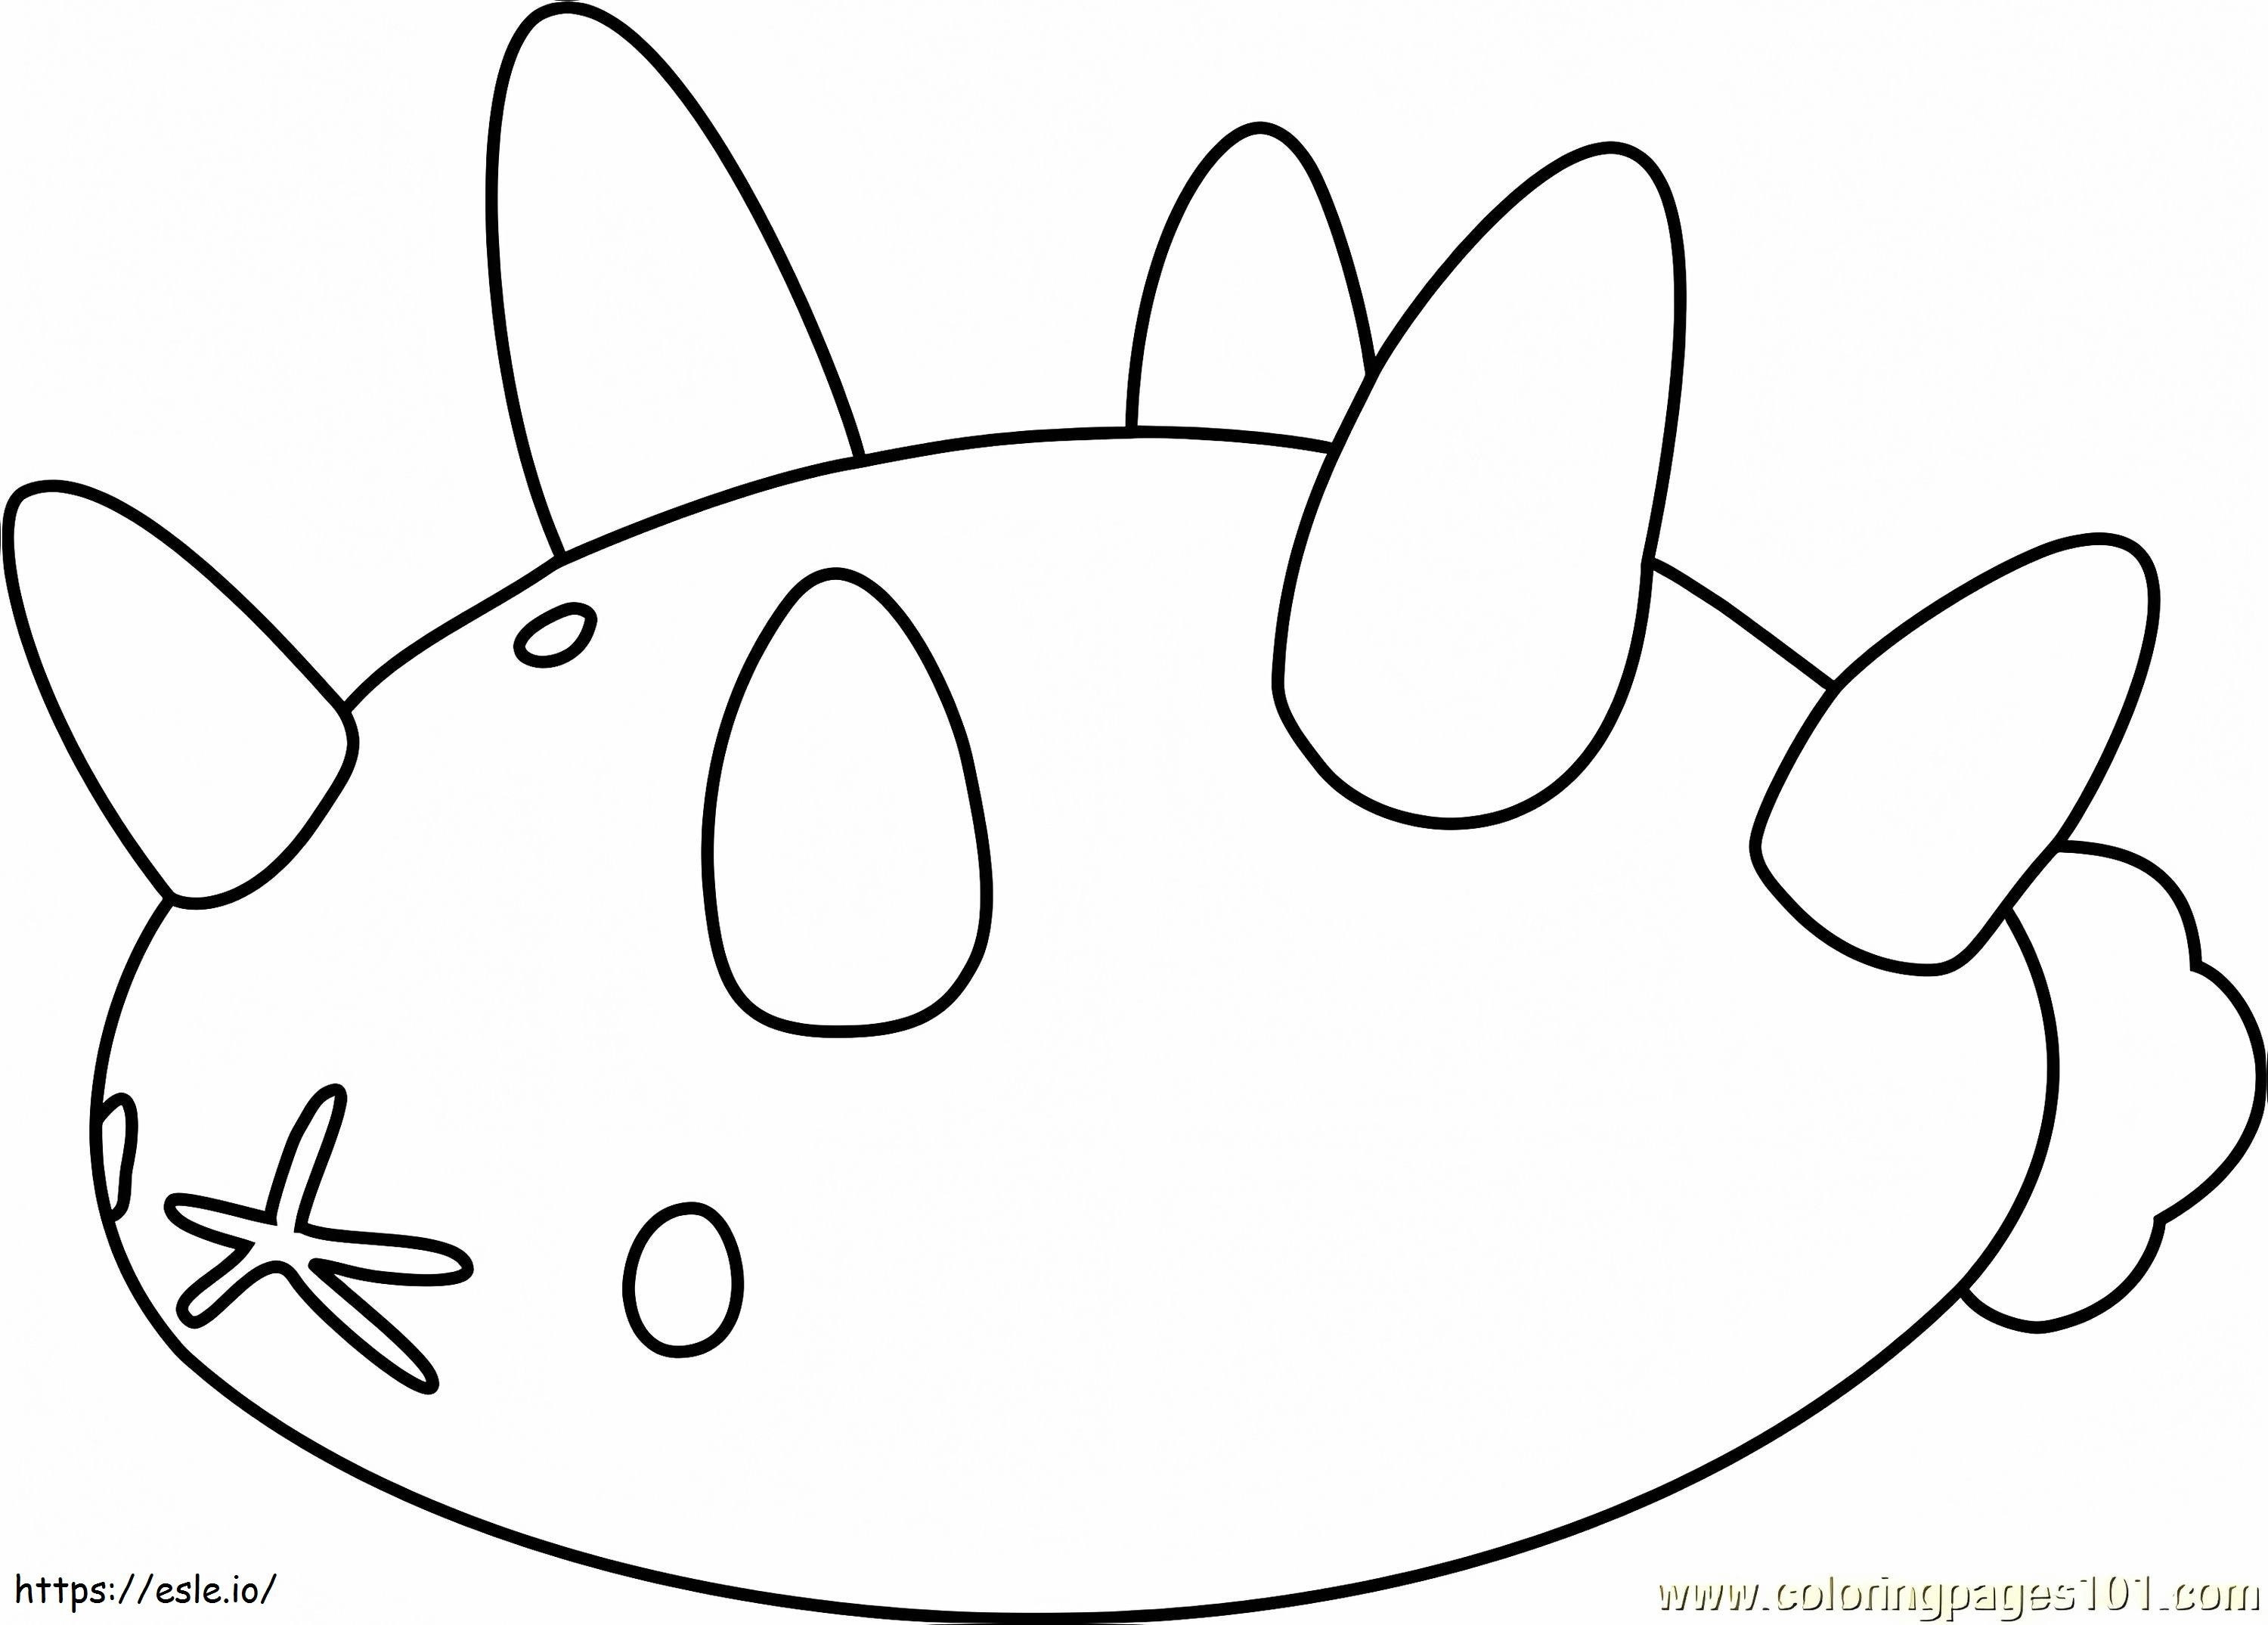 1529894350_24 coloring page